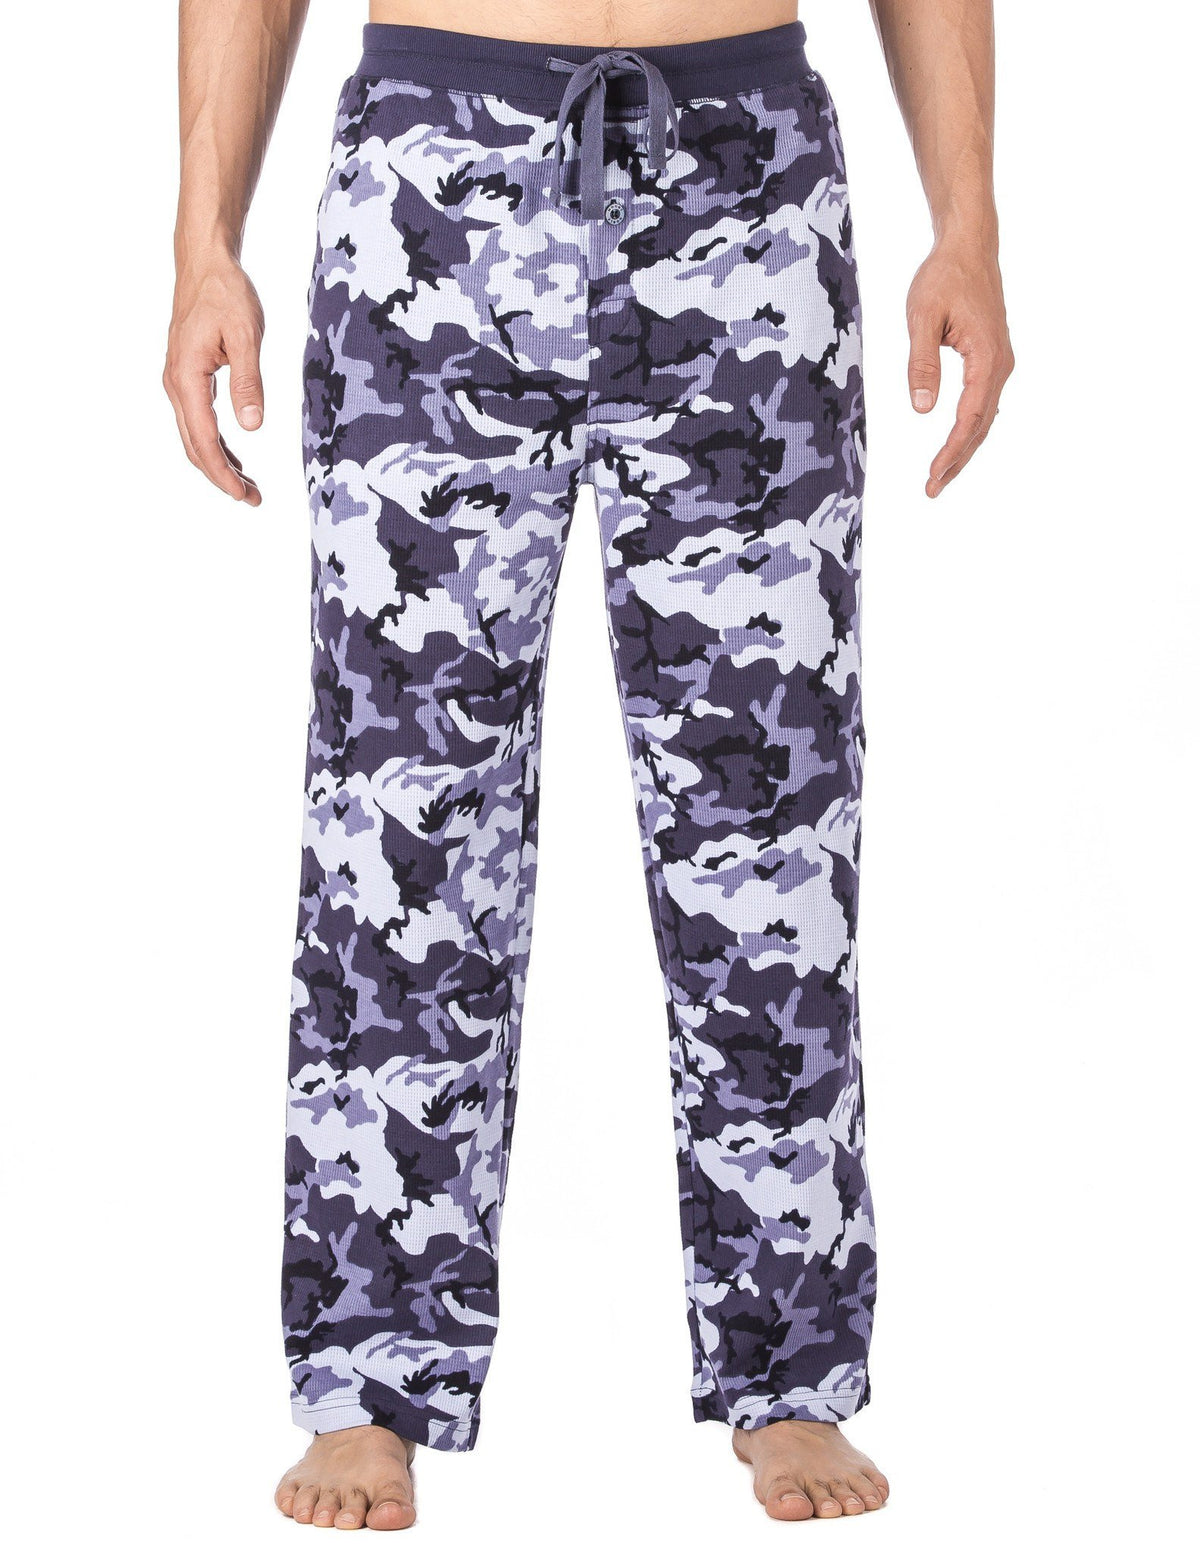 Men's Waffle Knit Thermal Lounge Pant - Camo - Blue